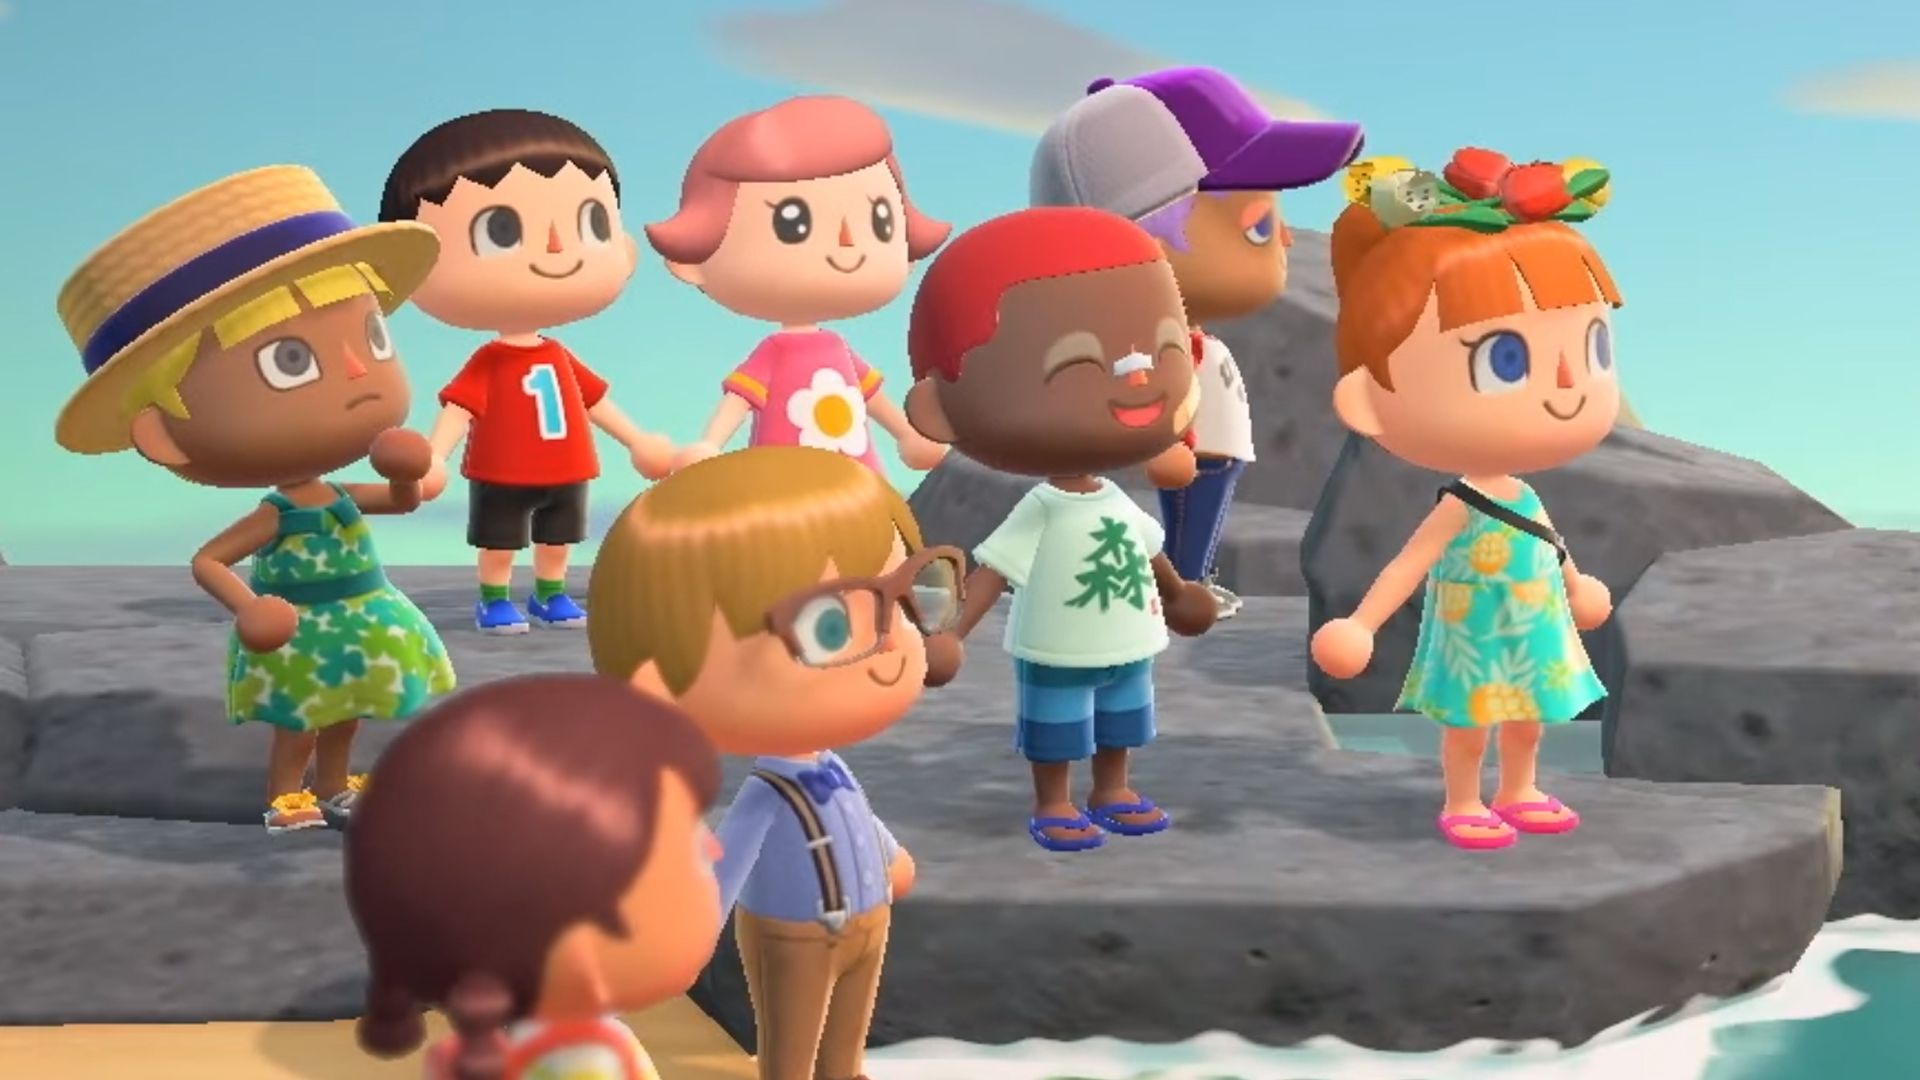 Animal Crossing For Switch Delayed, Now Called New Horizons